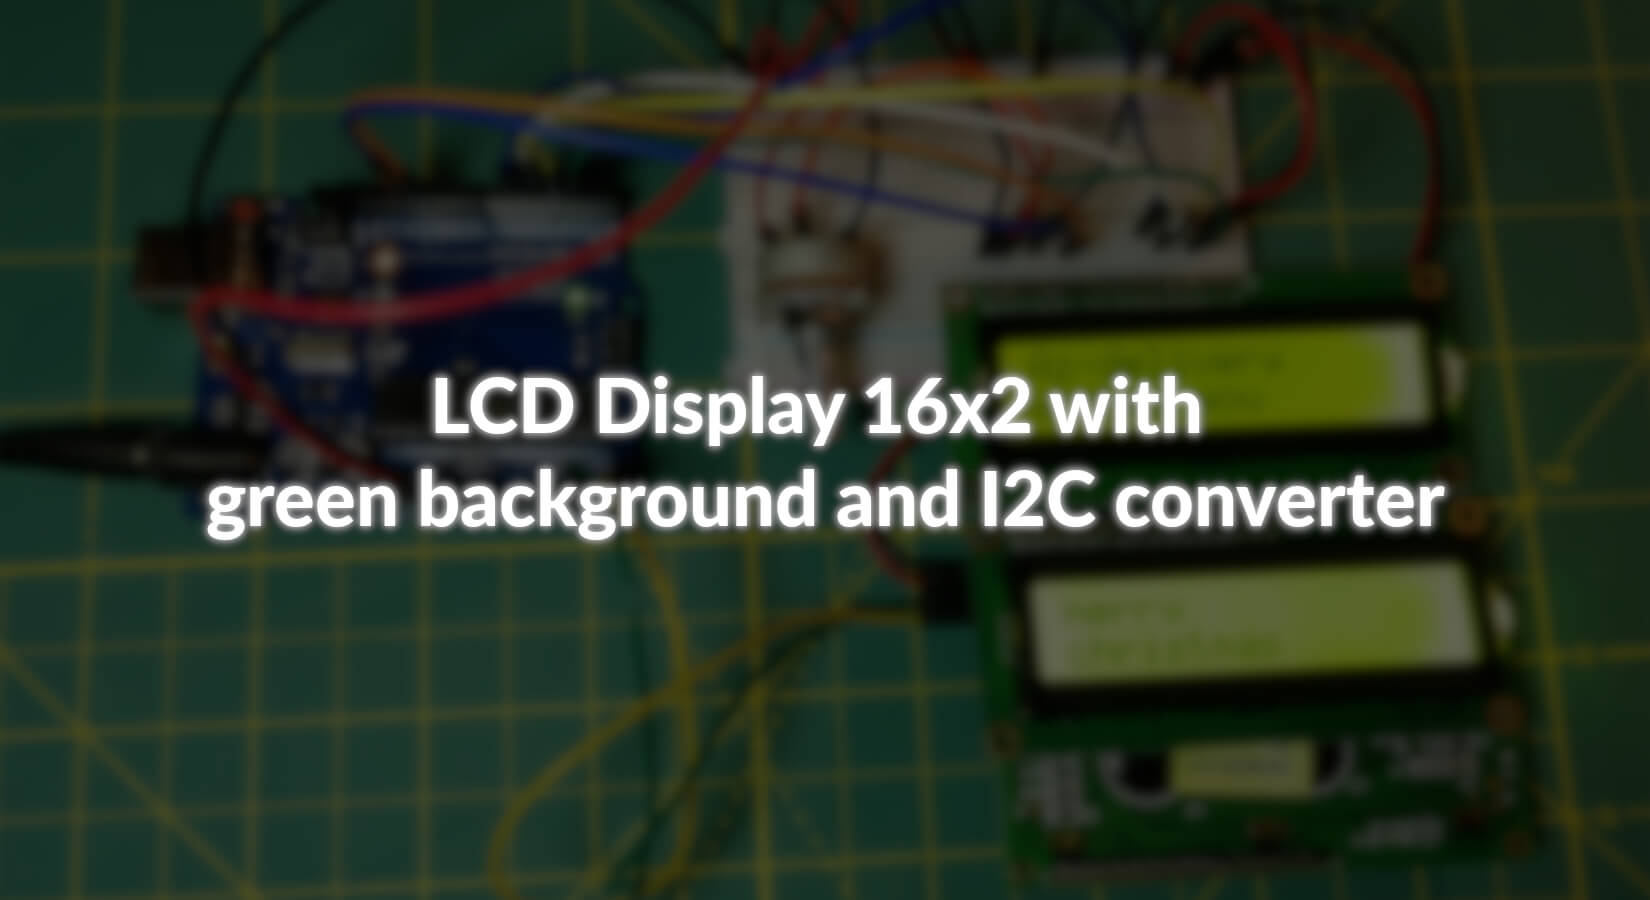 LCD Display 16x2 with green background and I2C converter - AZ-Delivery